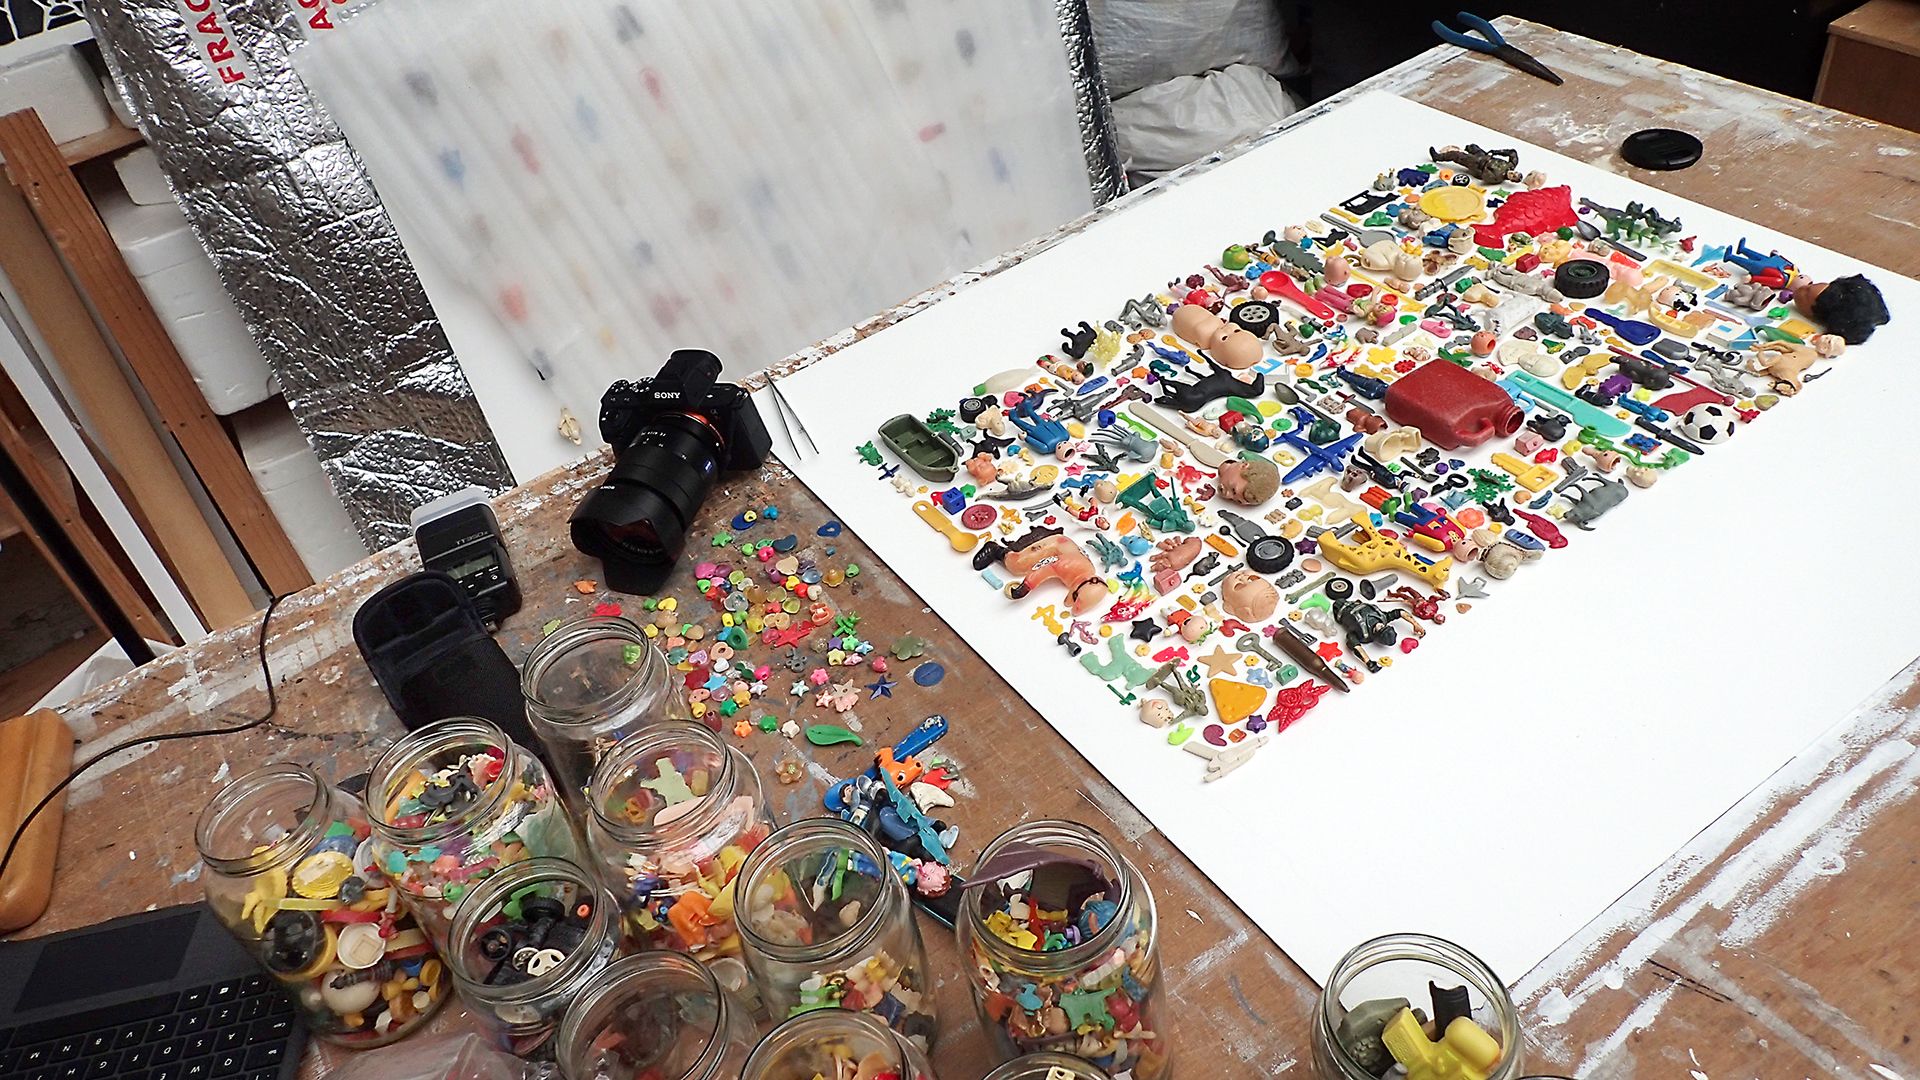 Images of artist's workspace with many glass jars holding assorted small plastic items like toys and beads. Next to it, a canvas with plastic objects arranged in a colorful montage